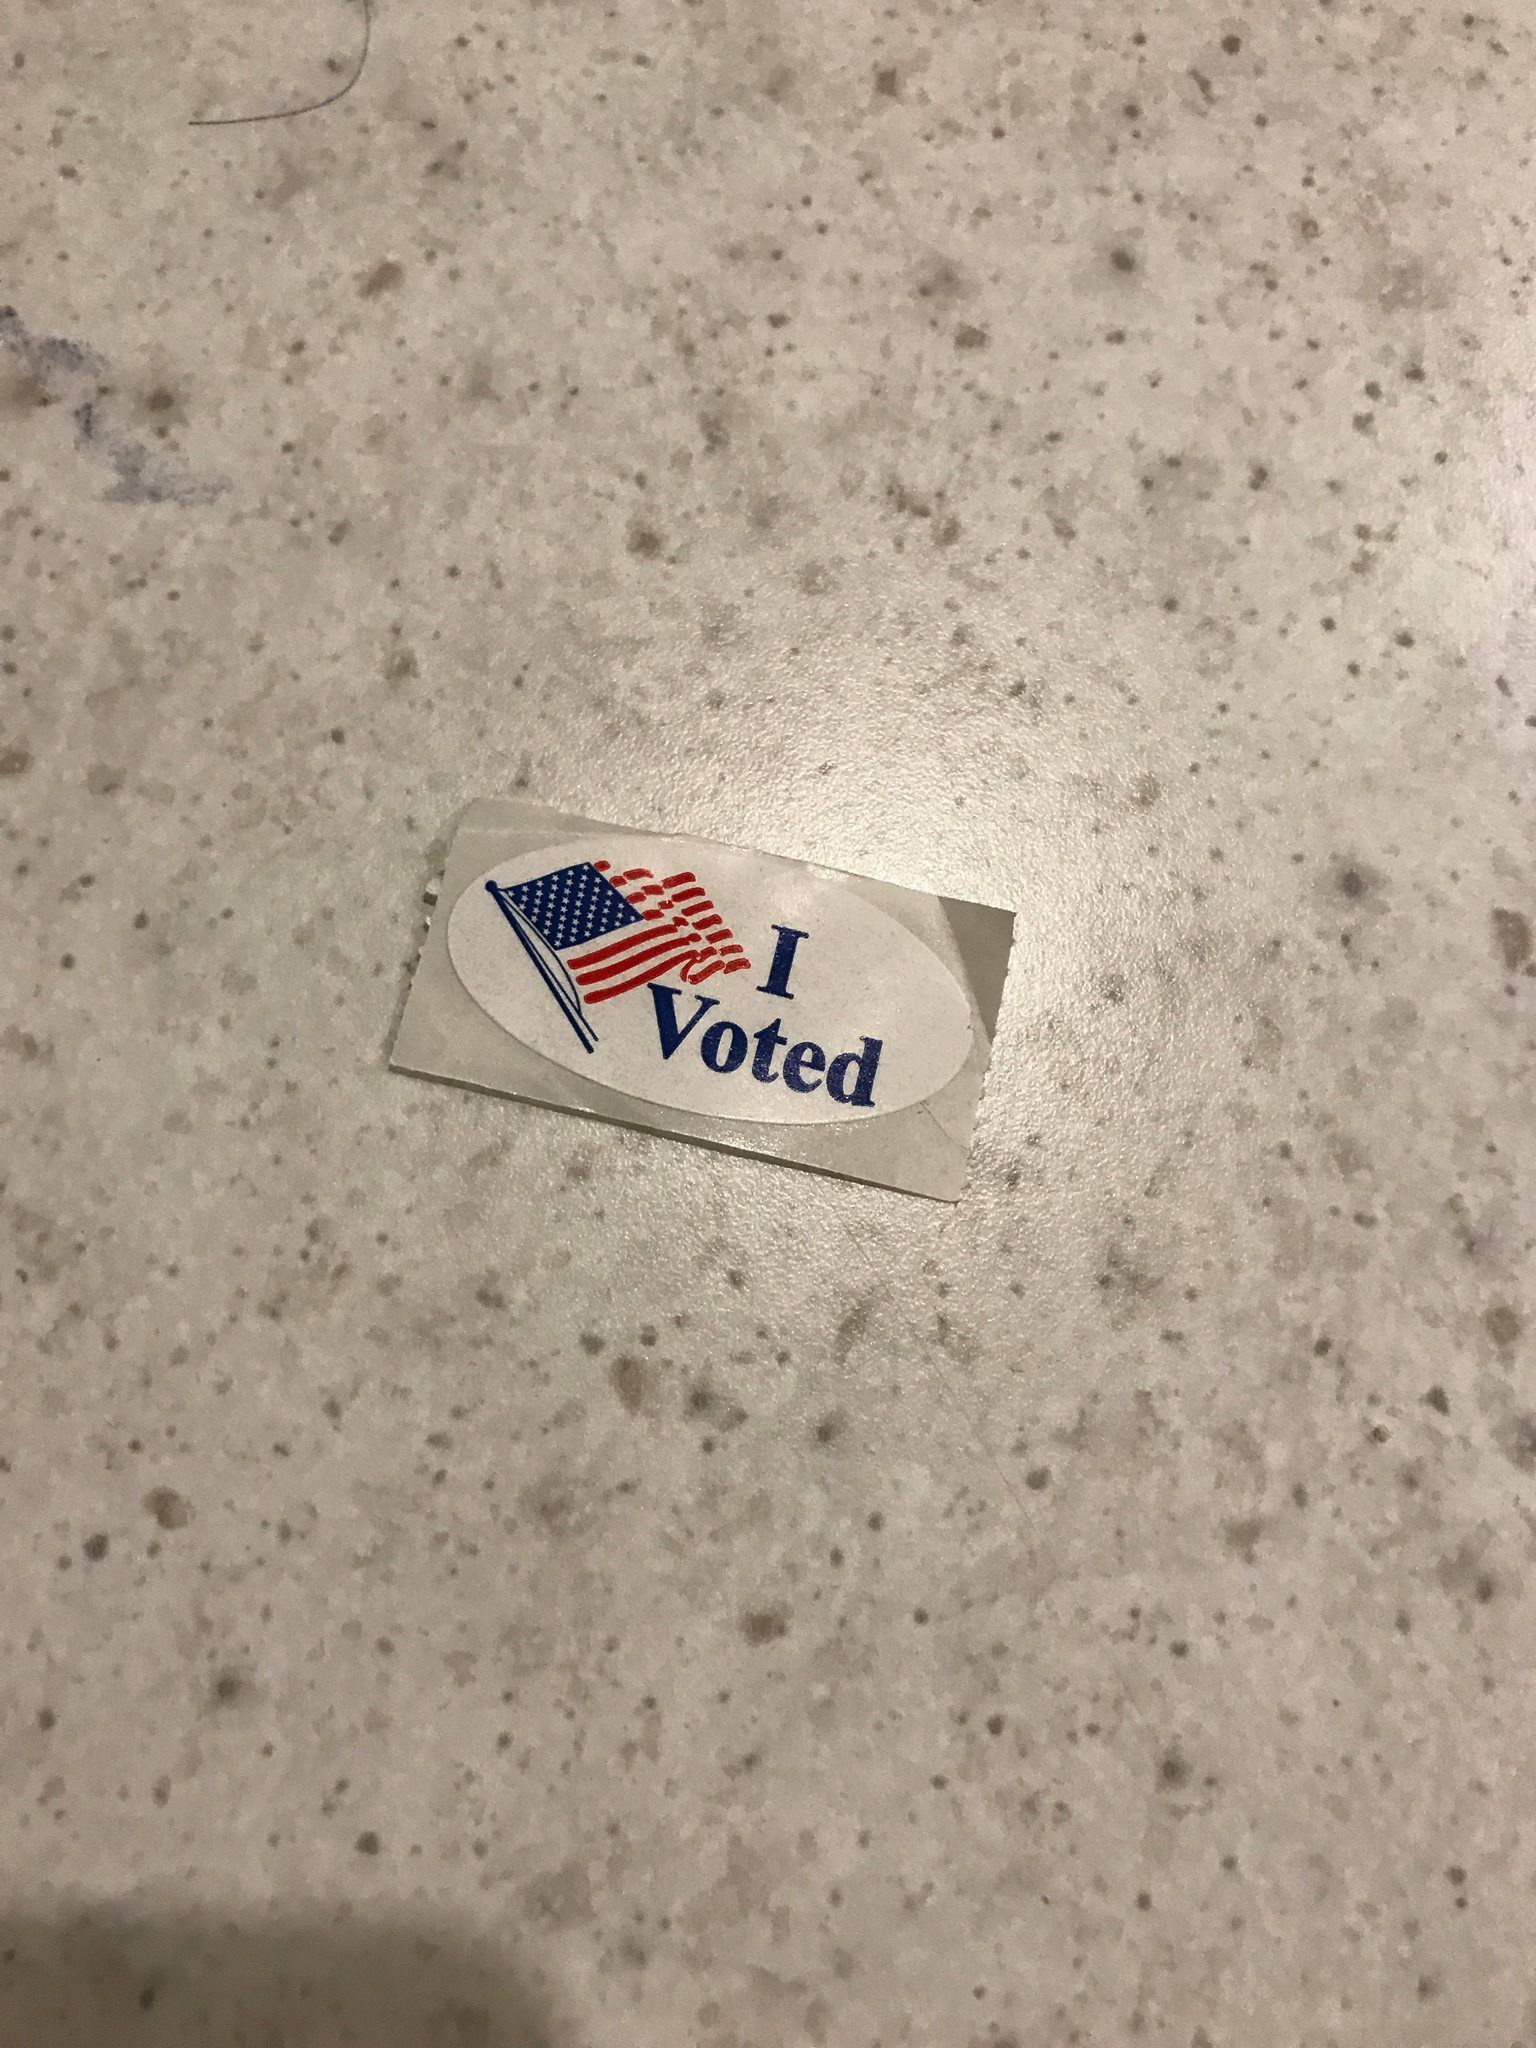 I Voted. Yes And Early Too!